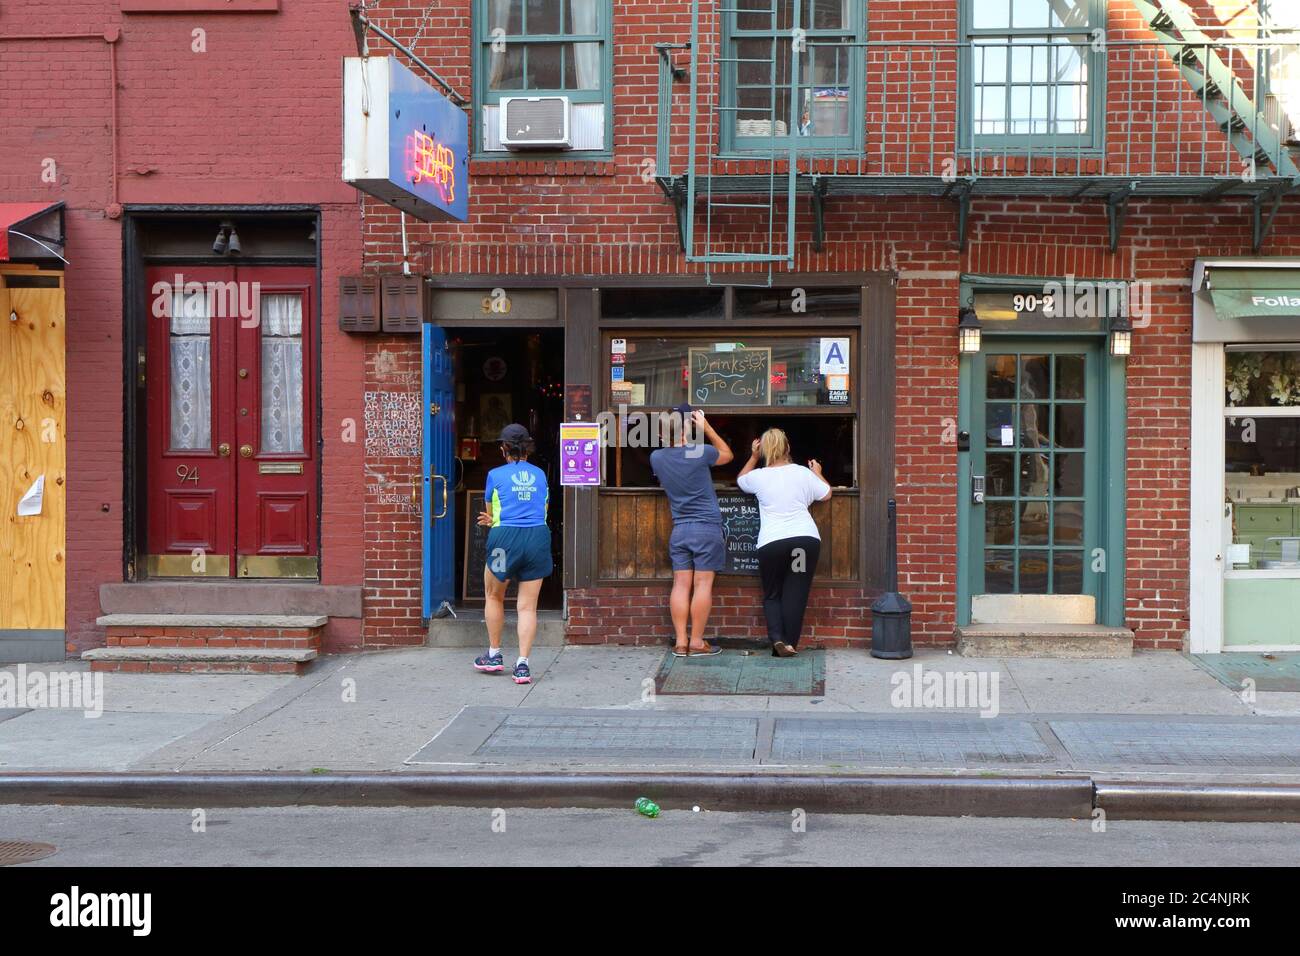 Johnny's Bar, 90 Greenwich Ave, New York, NYC storefront photo of a bar in the Greenwich Village neighborhood of Manhattan. June 2020. Stock Photo